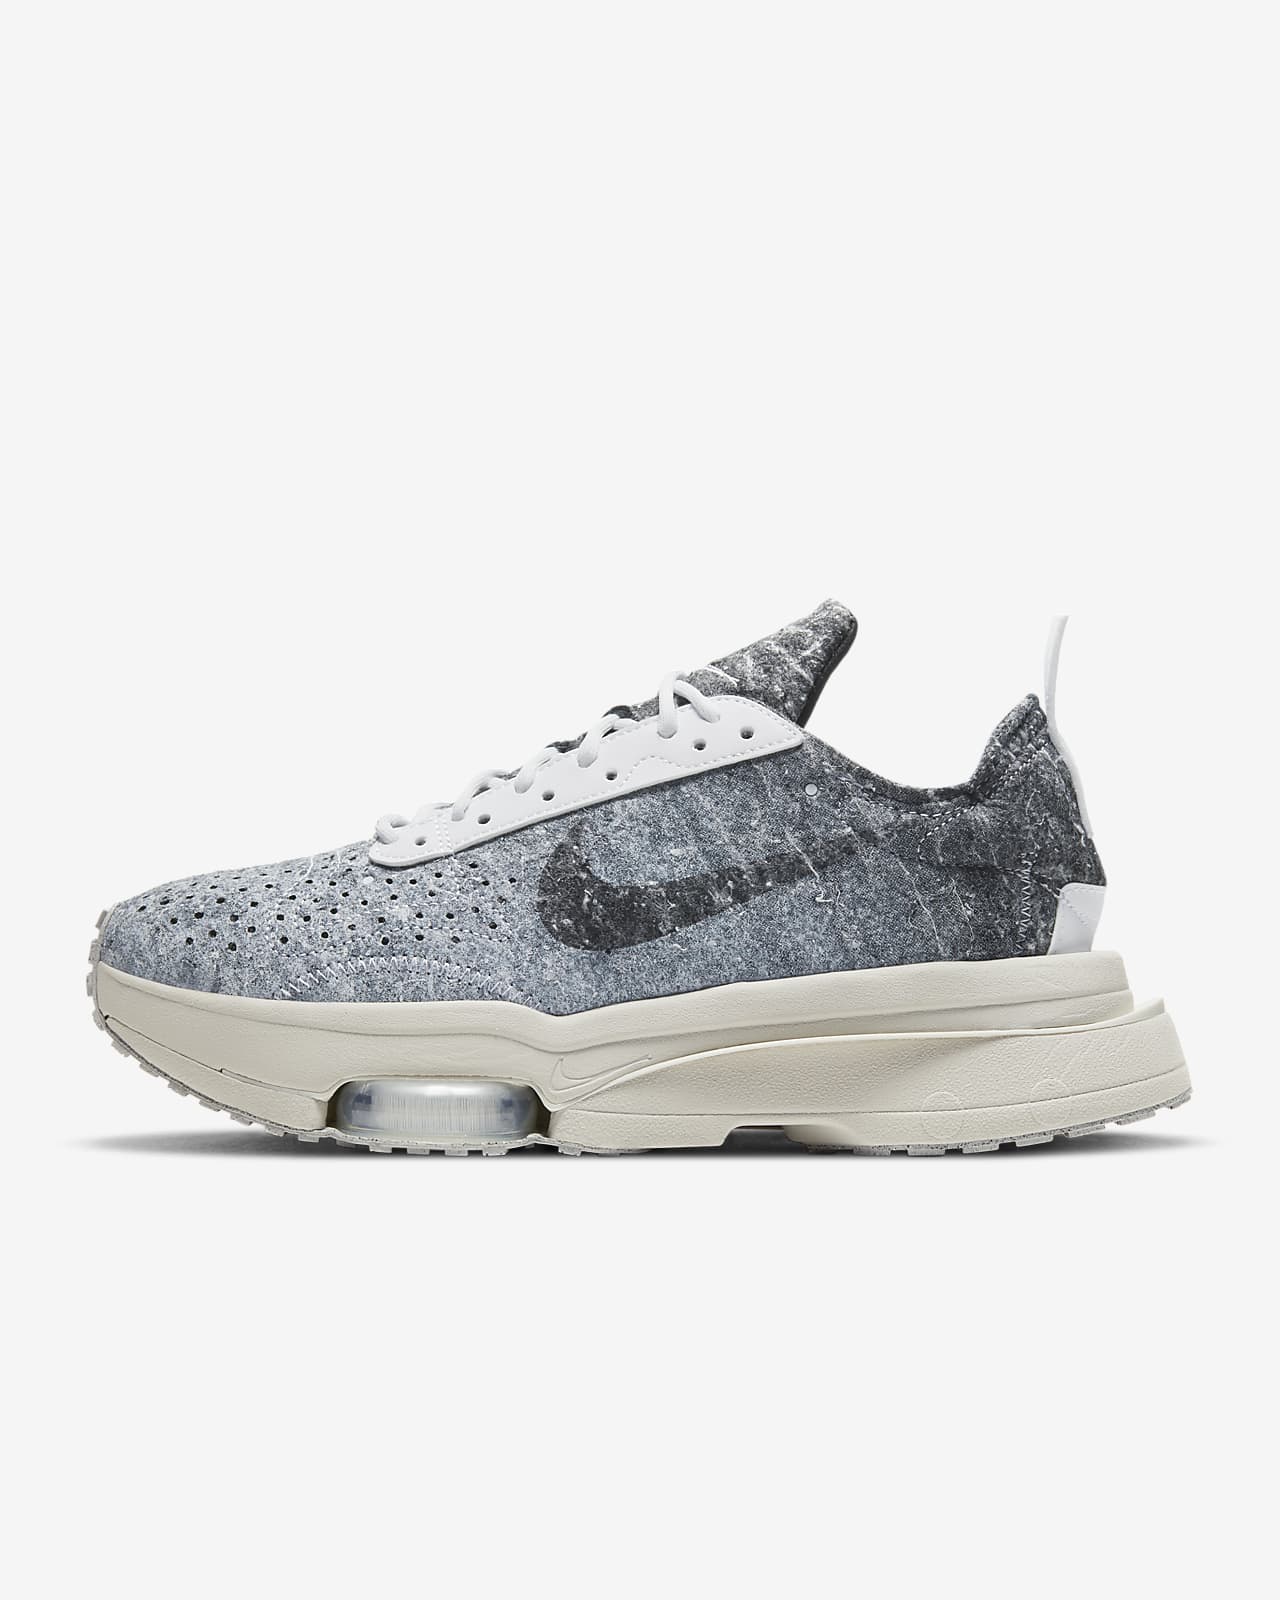 Women's Nike Air Zoom-Type SE 'Recycled Felt' $86.97 Free Shipping ...